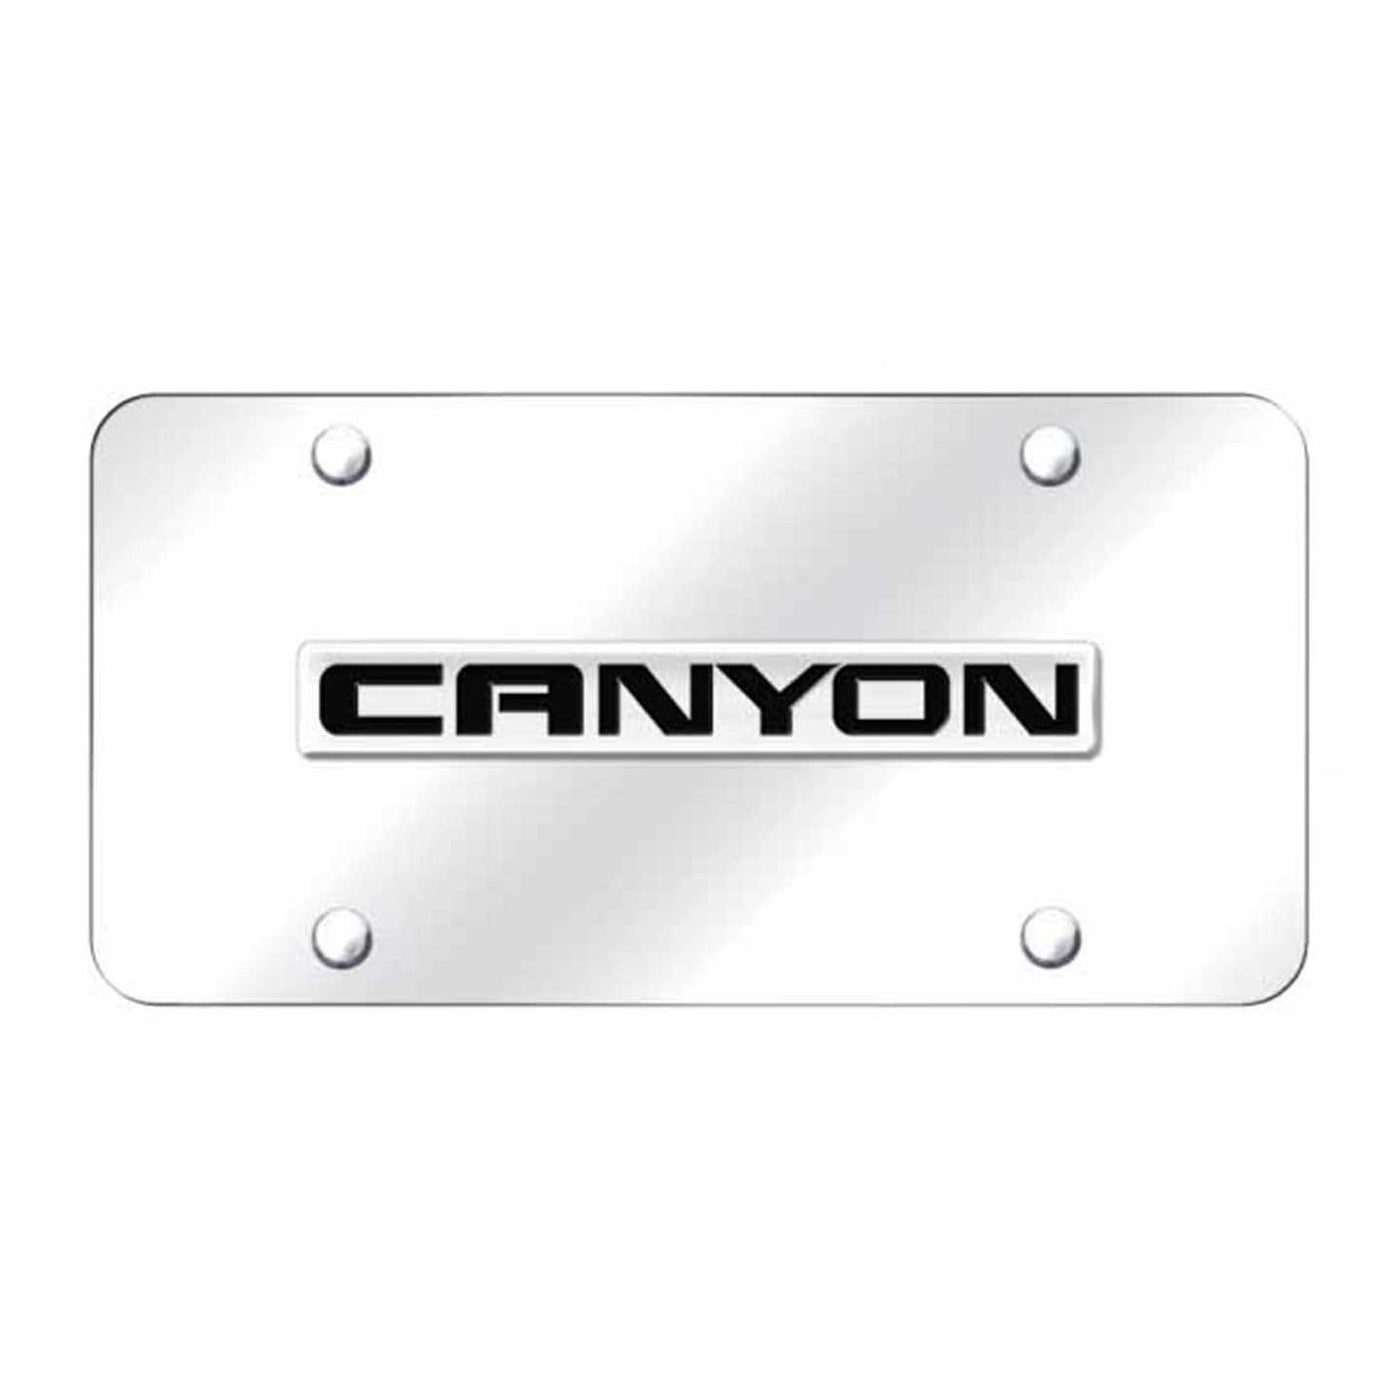 Canyon Name License Plate - Chrome on Mirrored